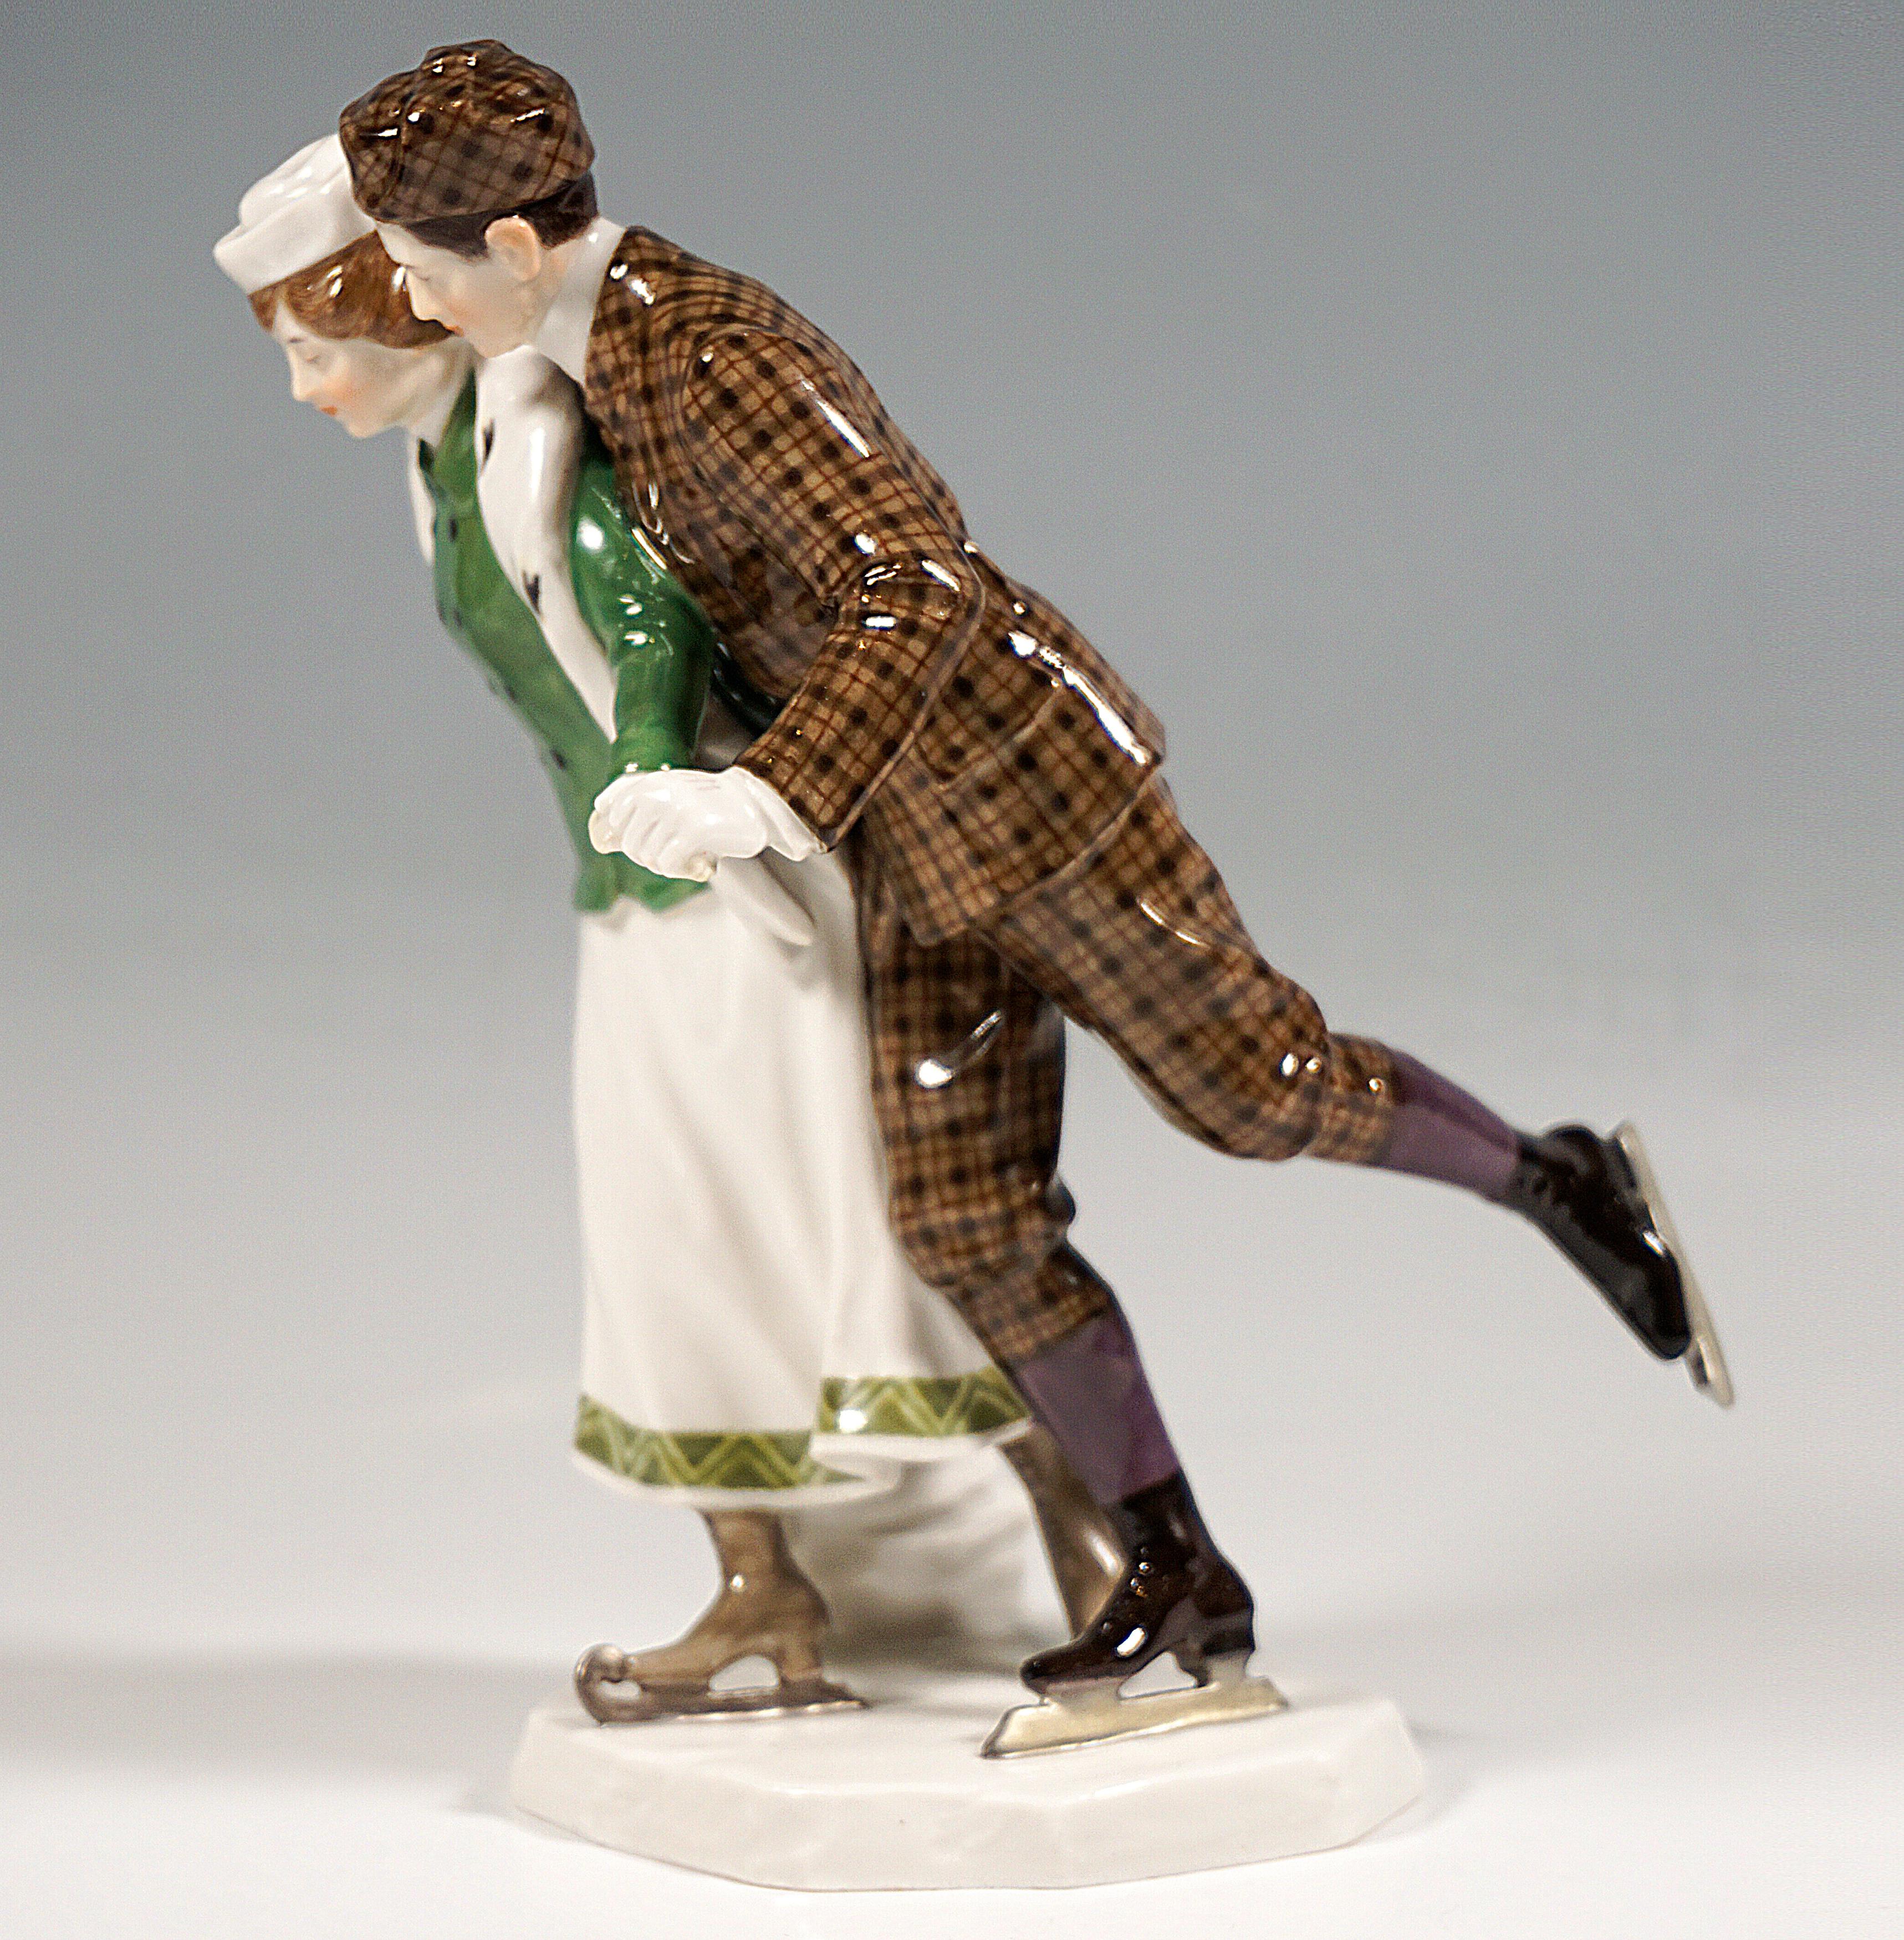 Delicate and rare Meissen Art Nouveau porcelain group:
Skating couple in elegant winter clothing: The lady in a long, white skirt with a green decorated hem, green jacket and white cap, and long ermine scarf, the gallant in a fine, sporty, brown